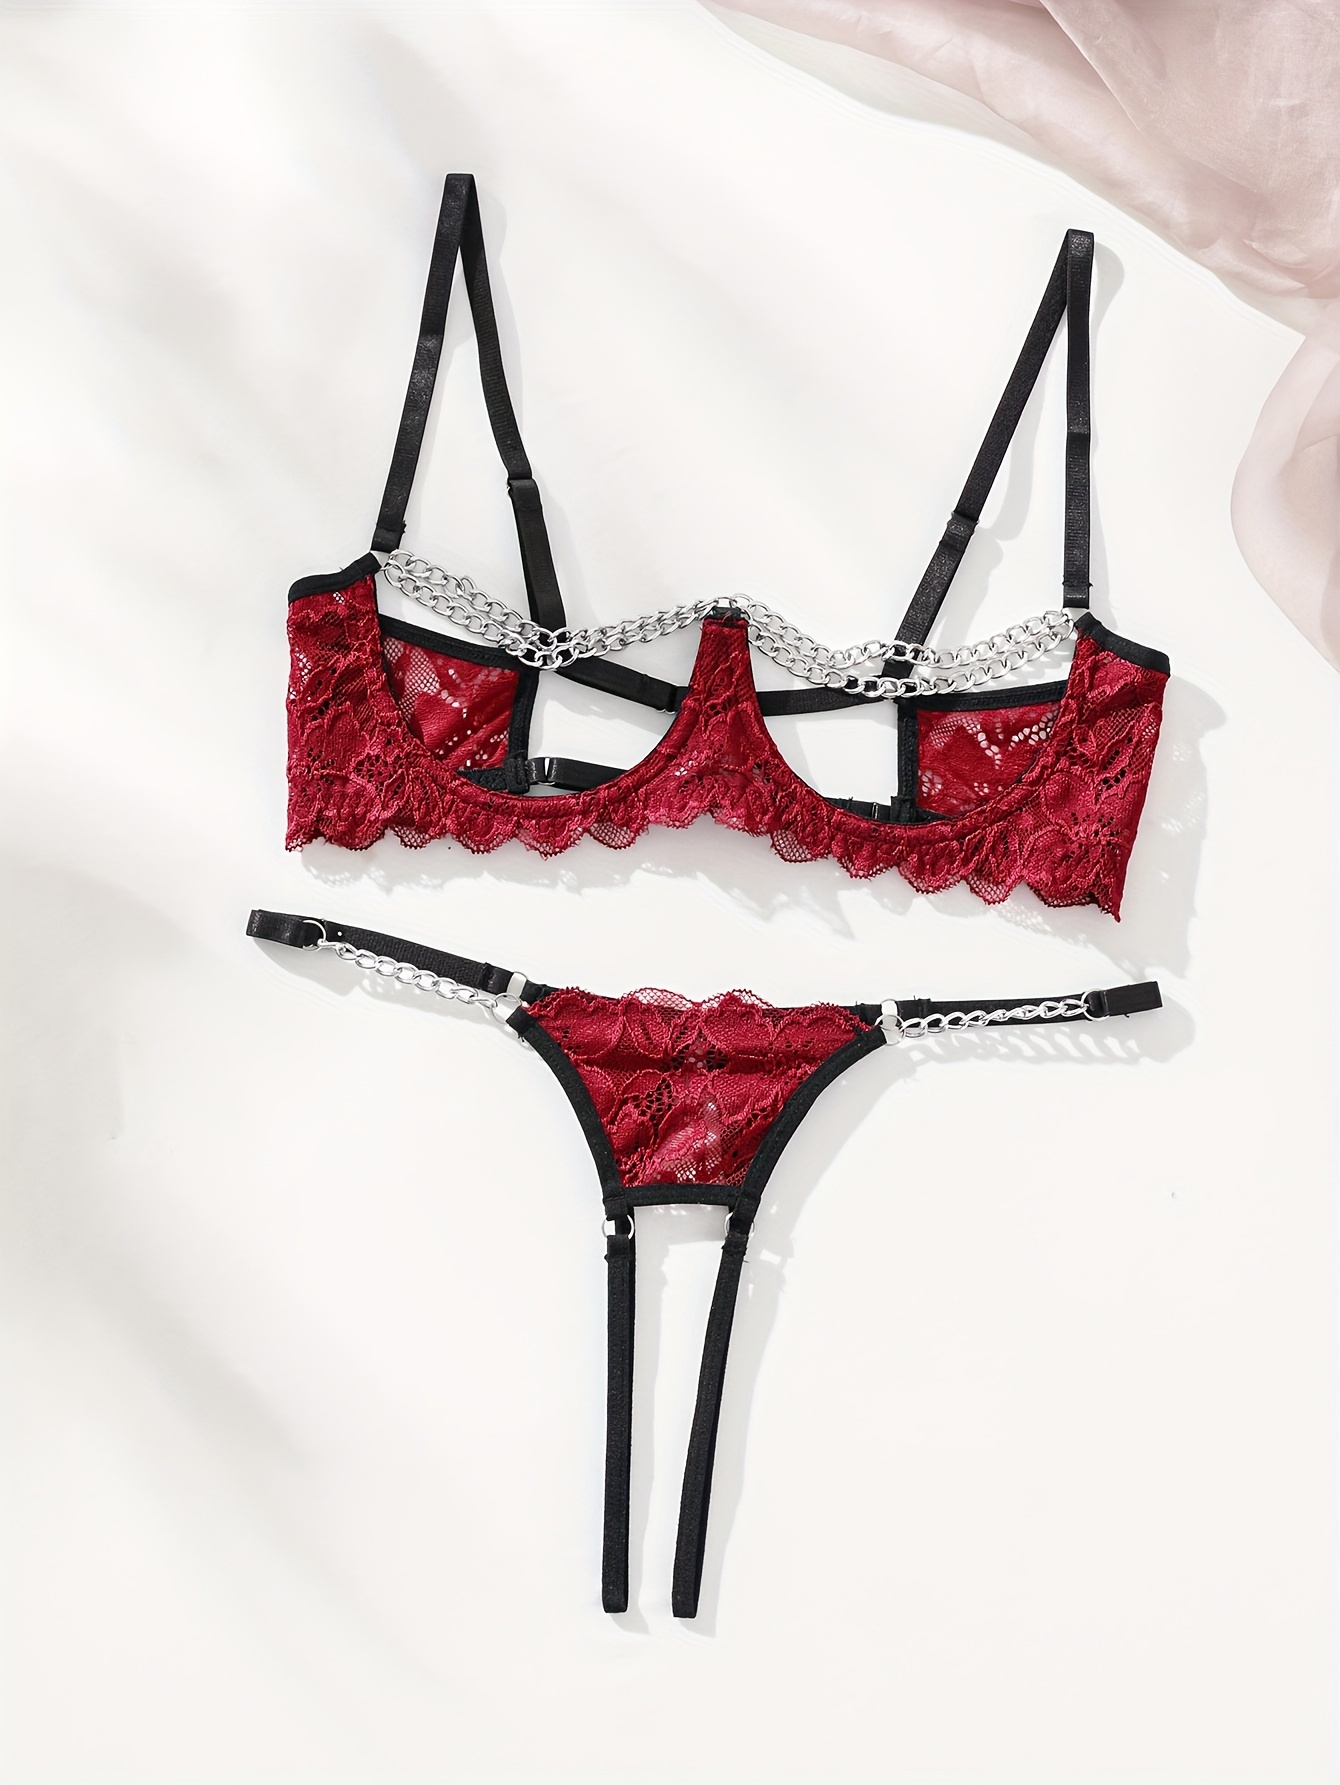 Red Open Crotch Lingerie Set, Open Cup Bra, Crotchless Panties